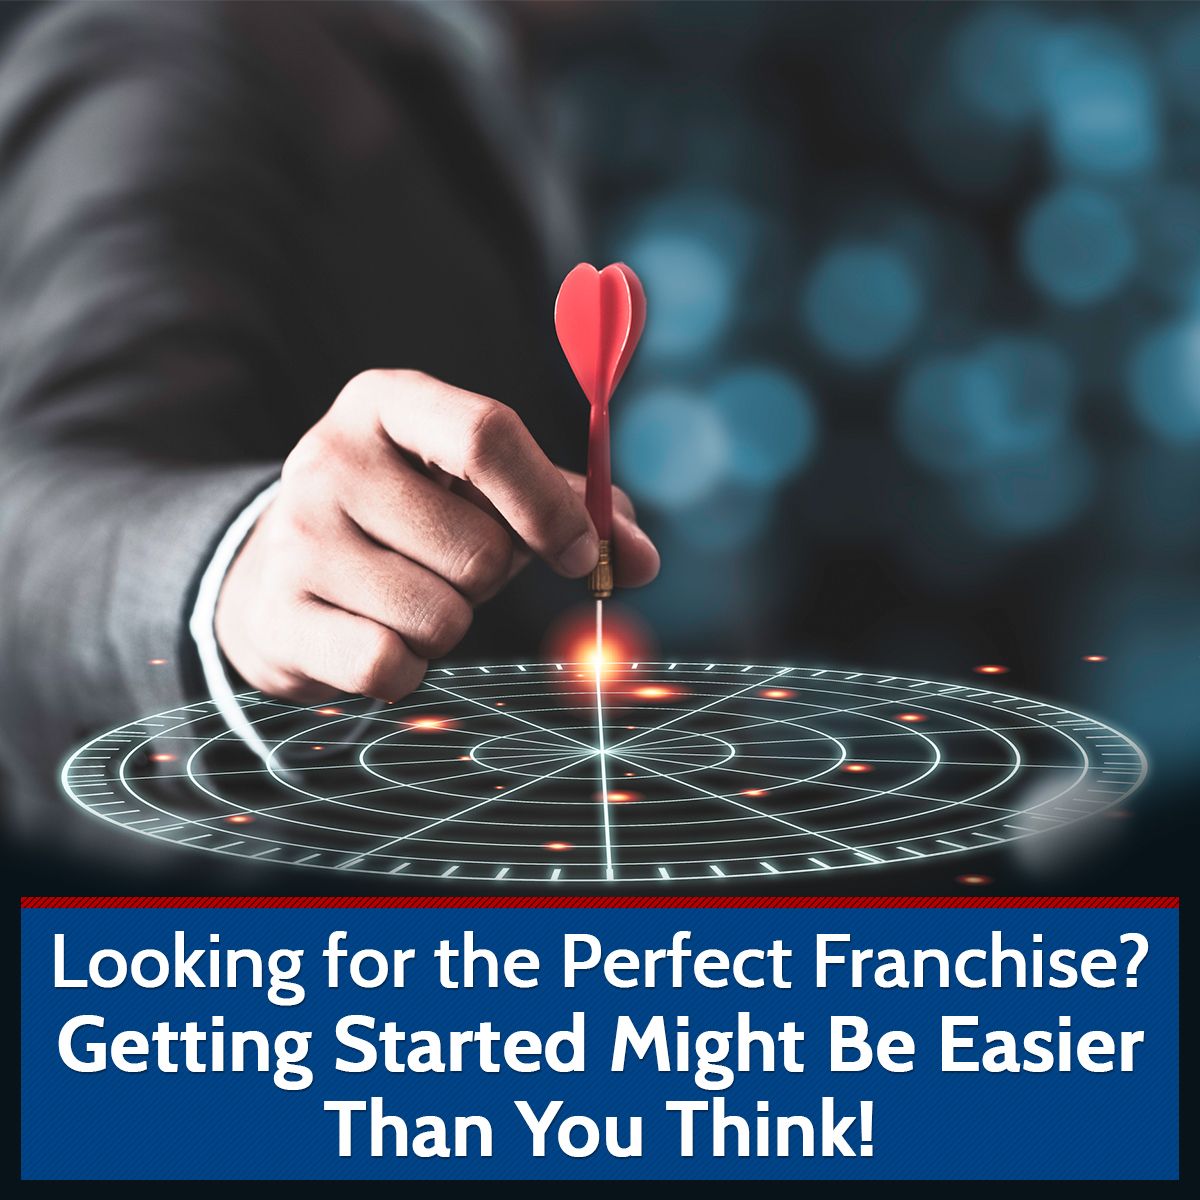 Looking for the Perfect Franchise? Getting Started Might Be Easier Than You Think!